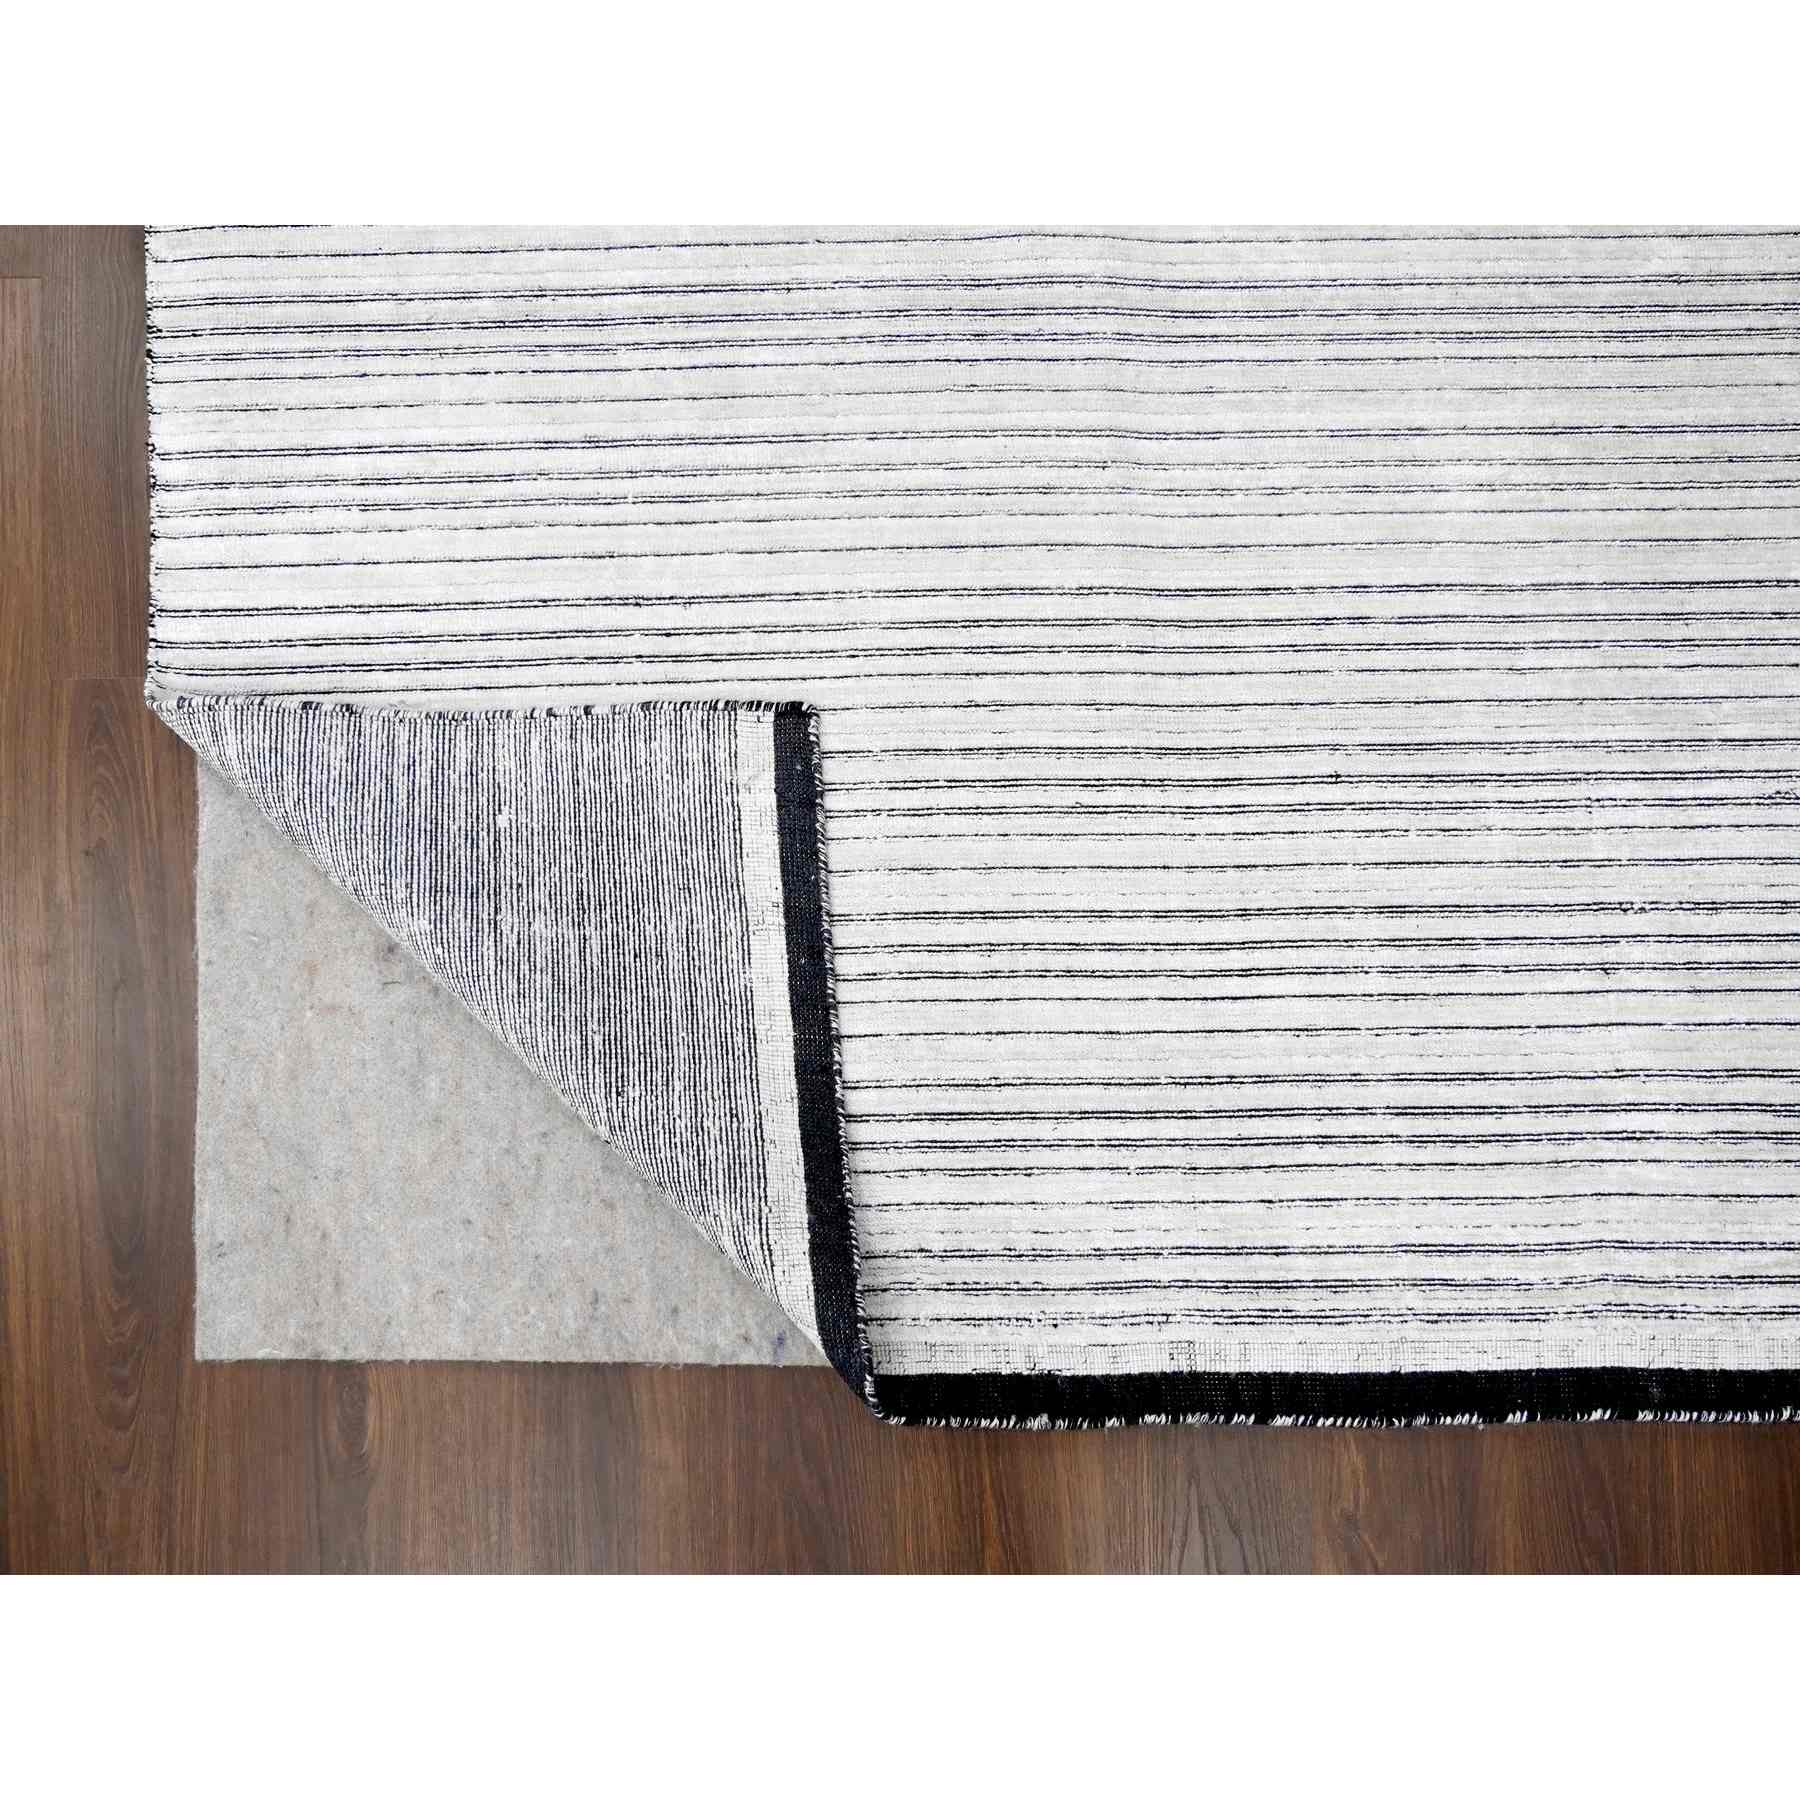 Modern-and-Contemporary-Hand-Loomed-Rug-421390